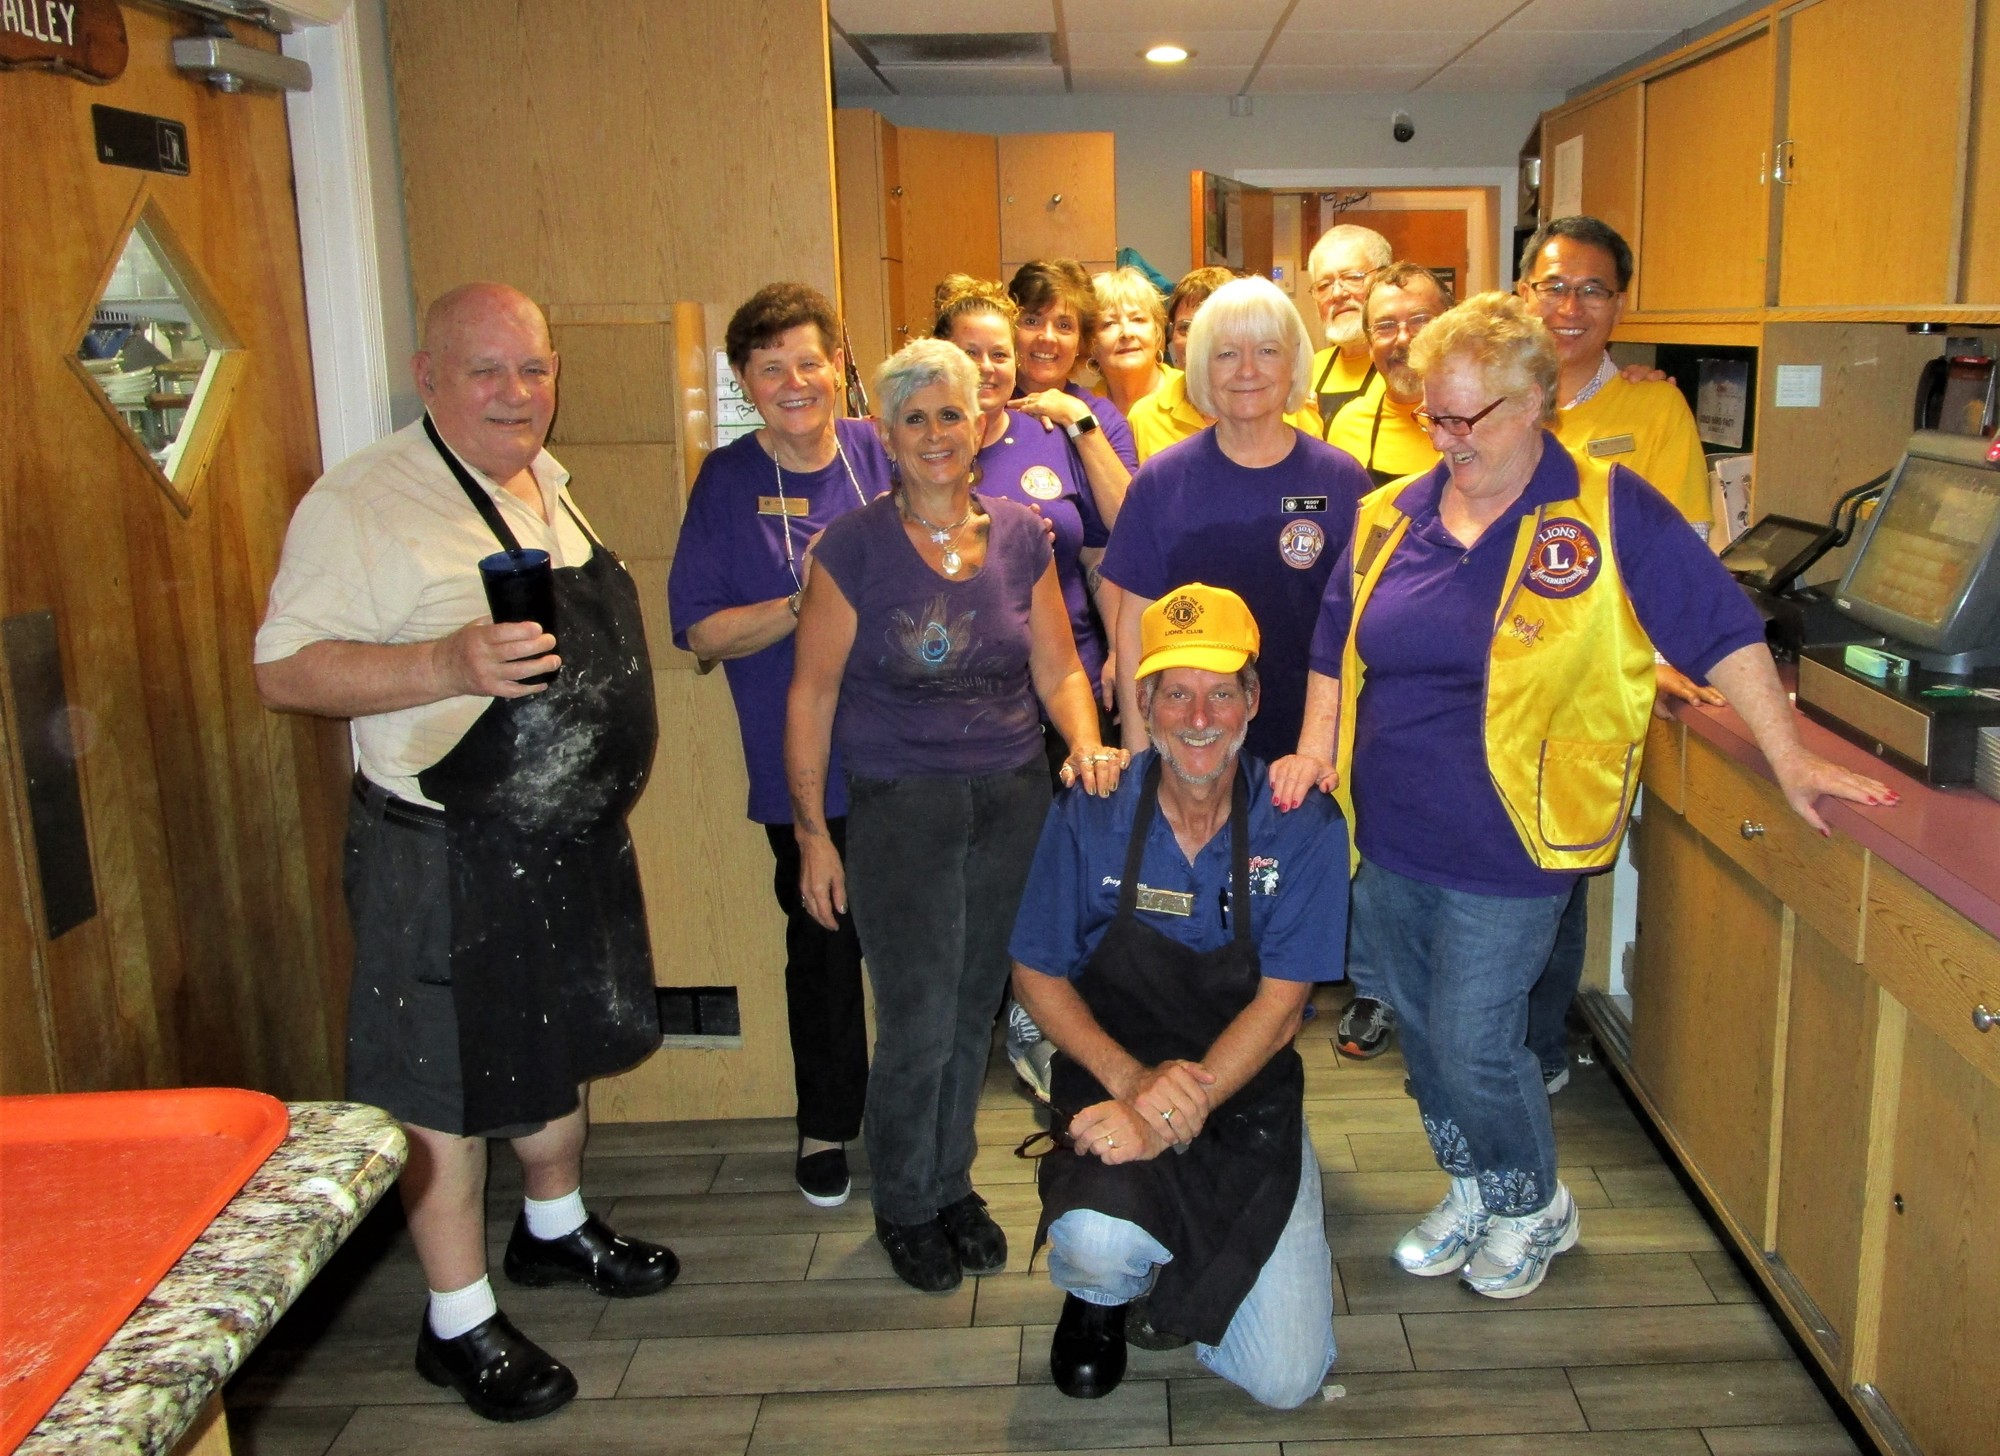 OBTS Lions Club members after the fish dinner fundraiser at Alfies Restaurant. Courtesy photo